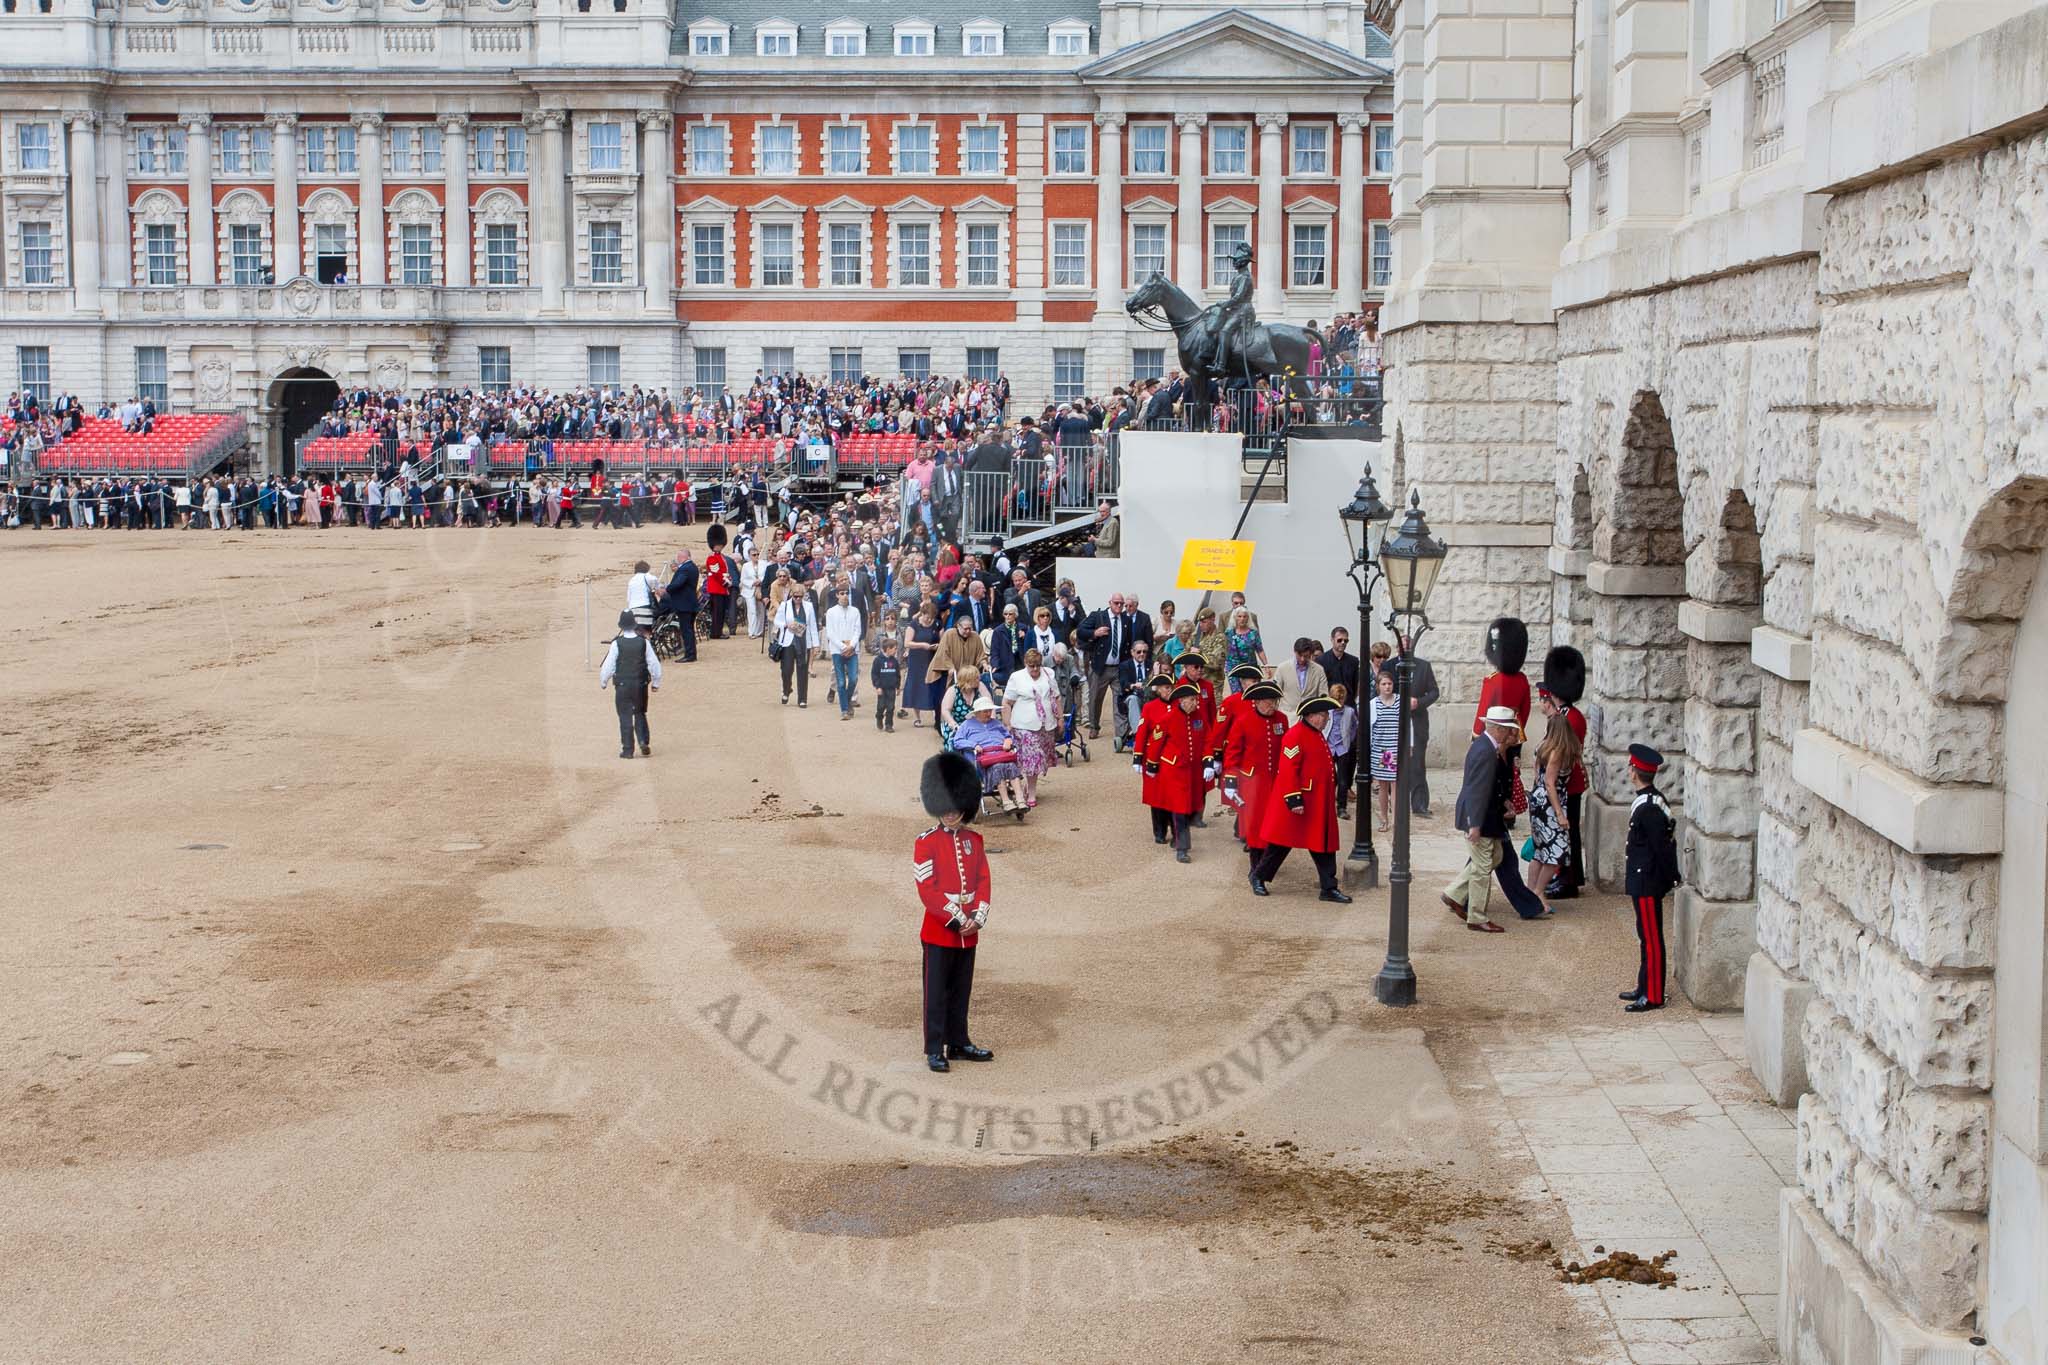 The Colonel's Review 2013.
Horse Guards Parade, Westminster,
London SW1,

United Kingdom,
on 08 June 2013 at 12:15, image #888